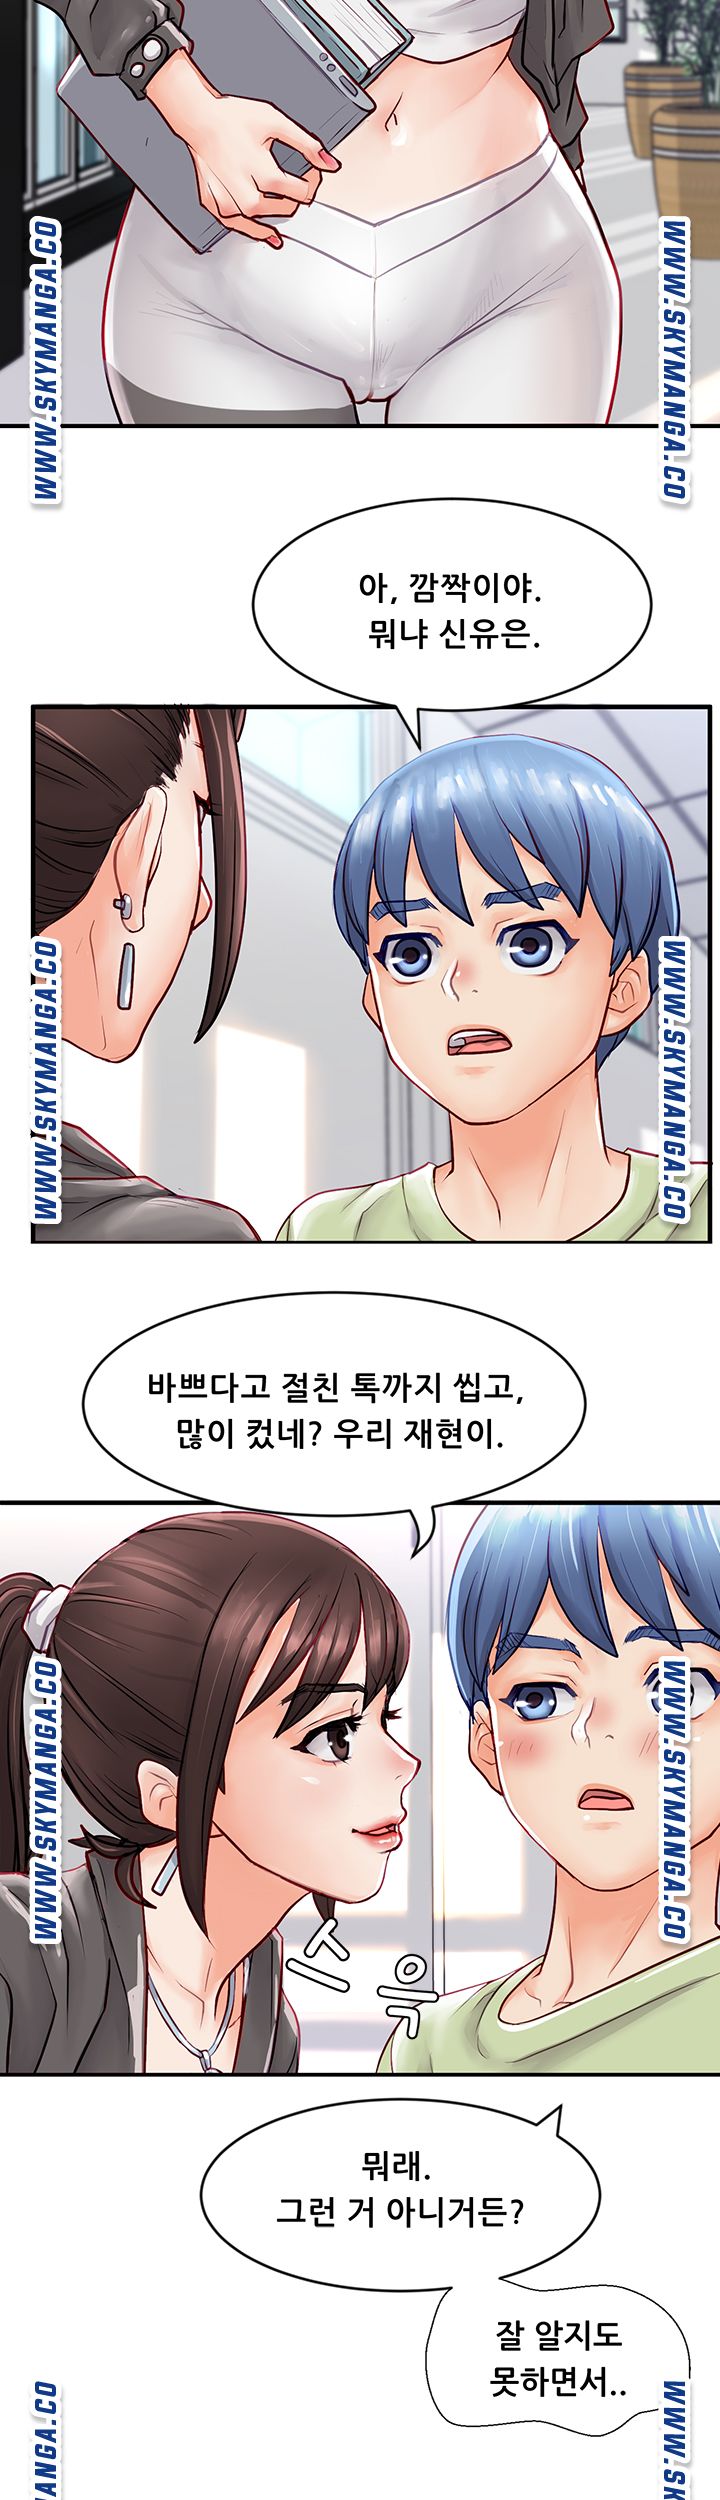 Broadcasting Club Raw - Chapter 2 Page 32